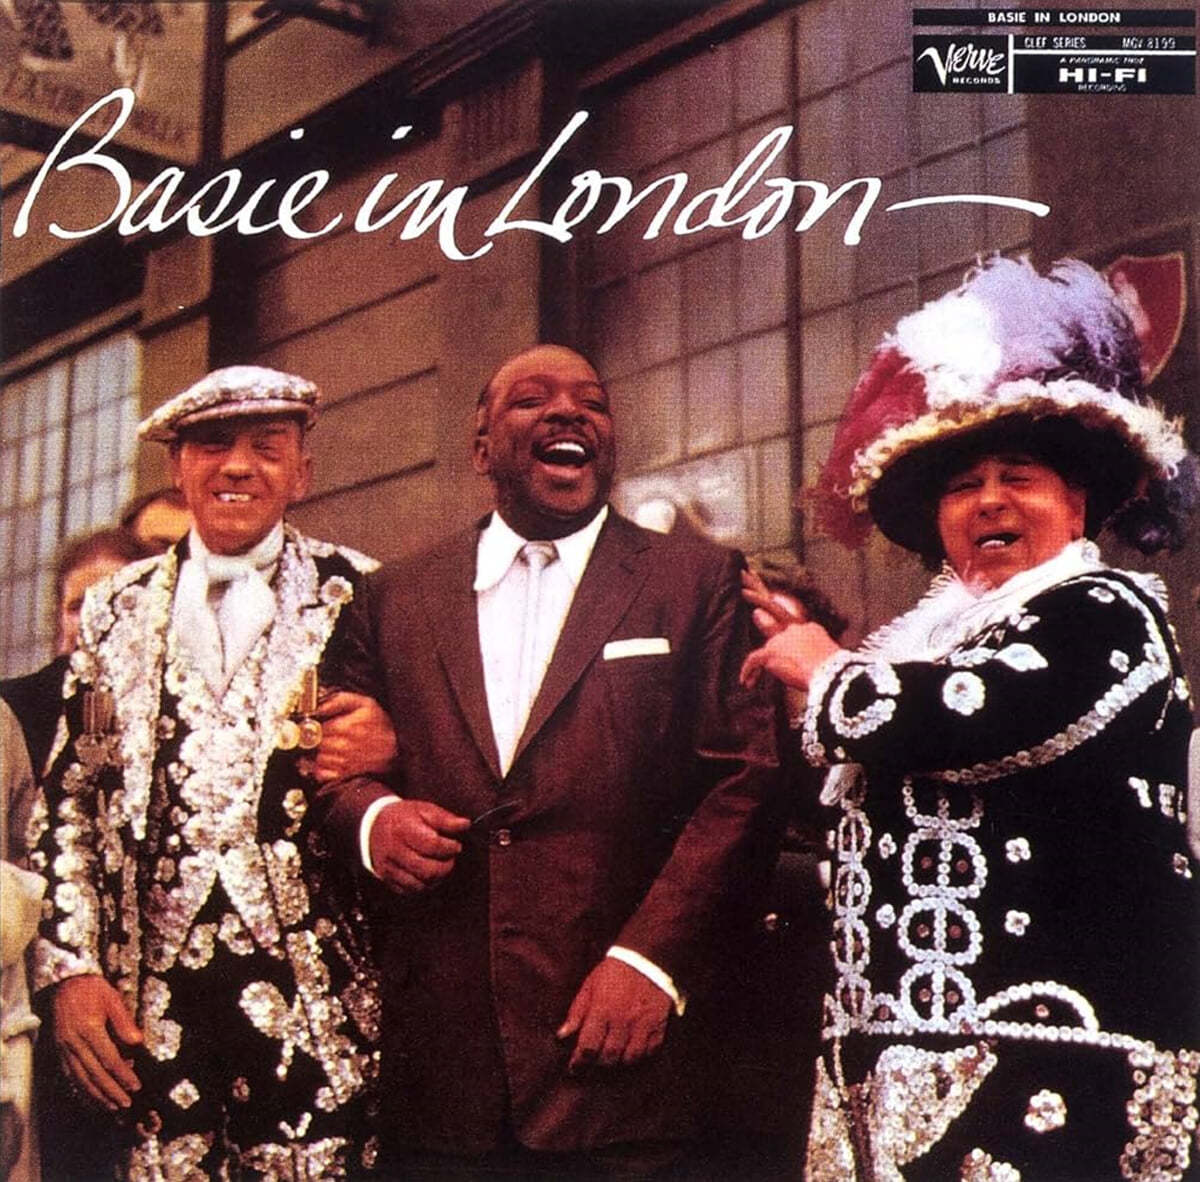 Count Basie Orchestra (카운트 베이시 오케스트라) - Basie in London 